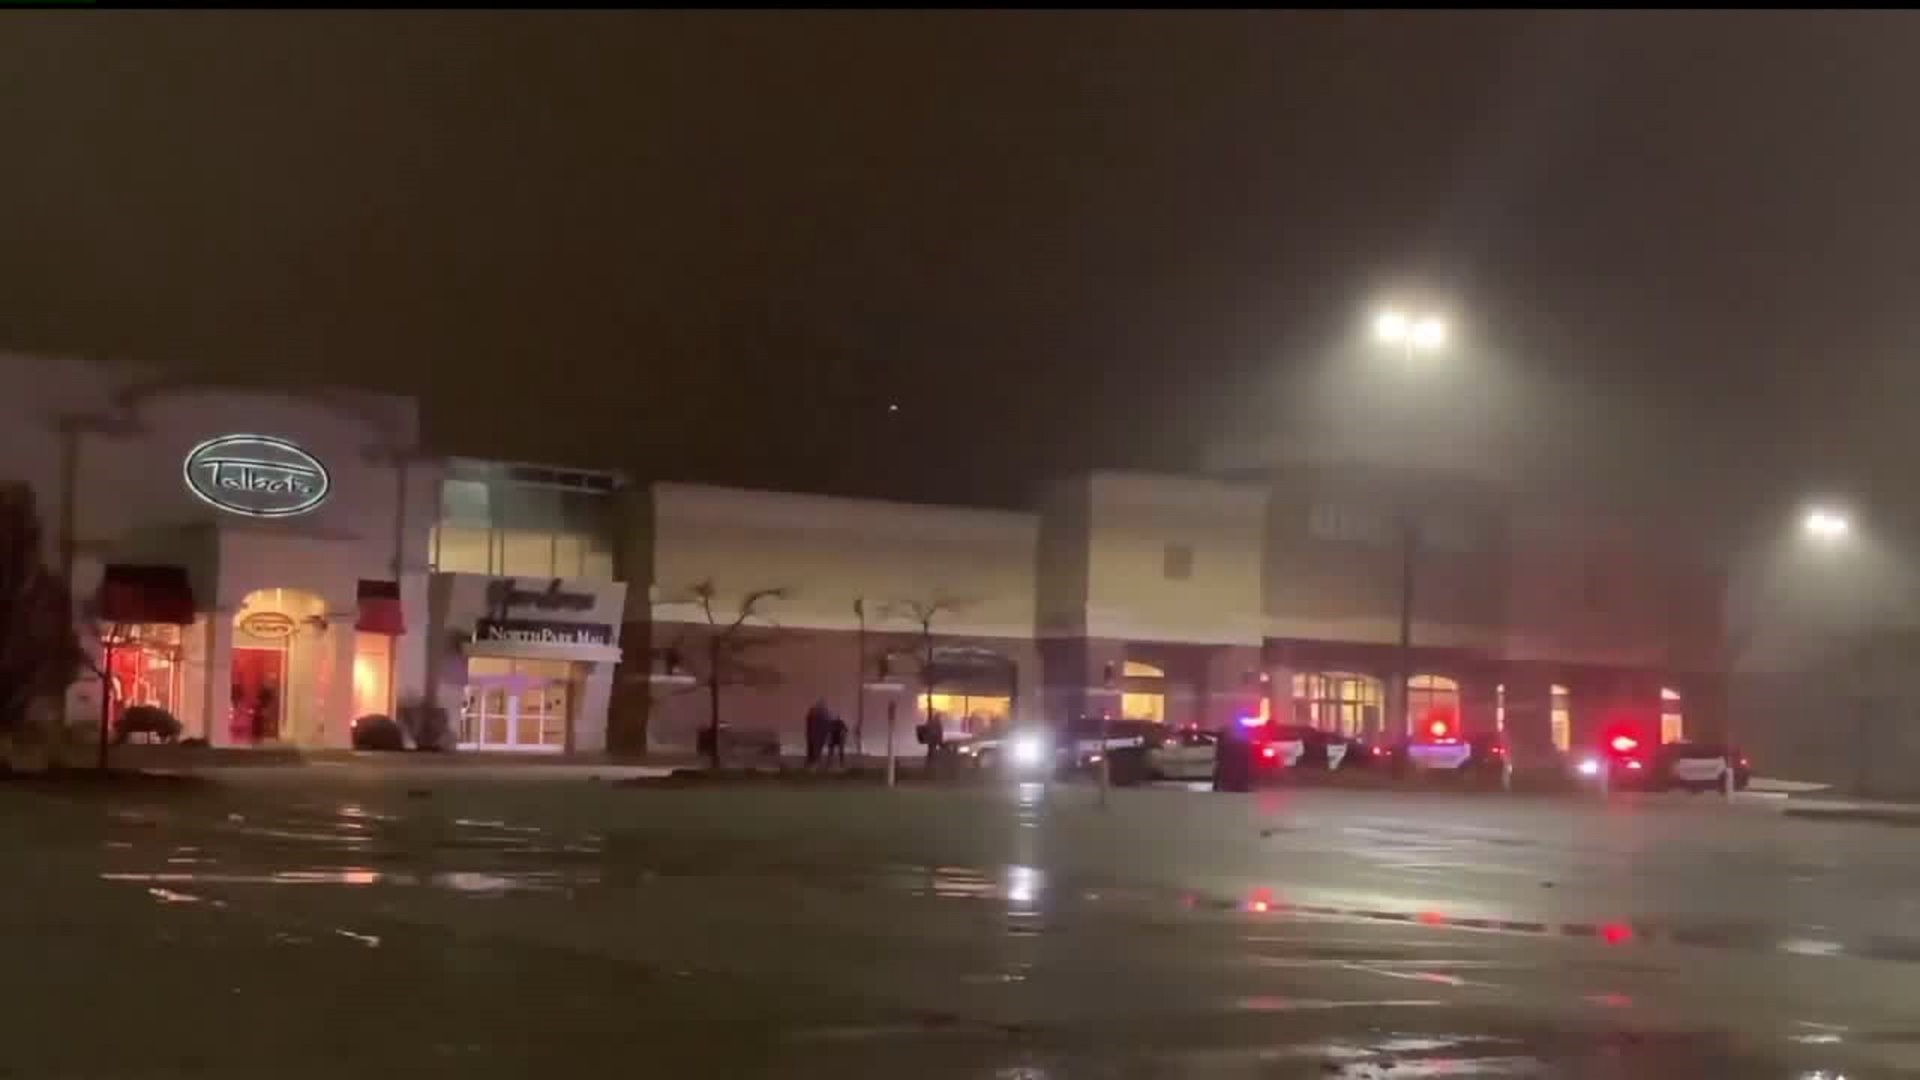 Police say false alarm led to large police response at Northpark Mall